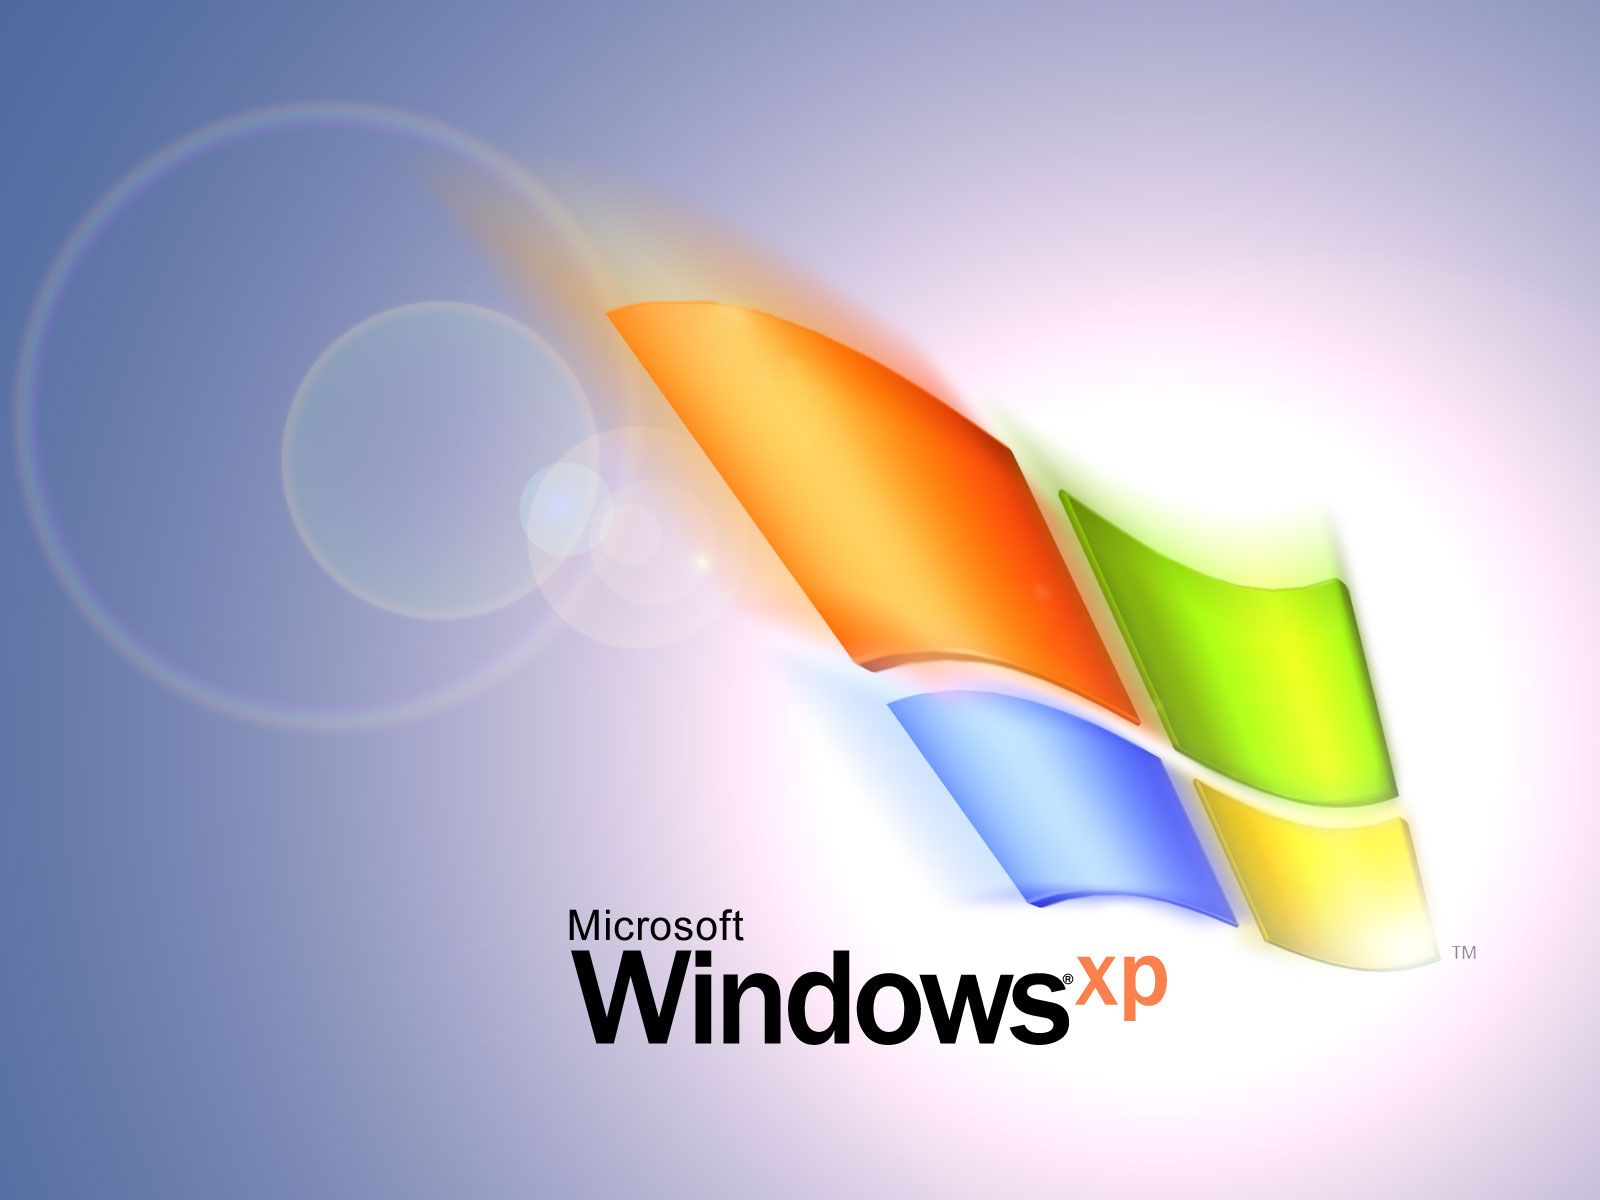 30 Hd Wallpapers For Laptop Windows Xp